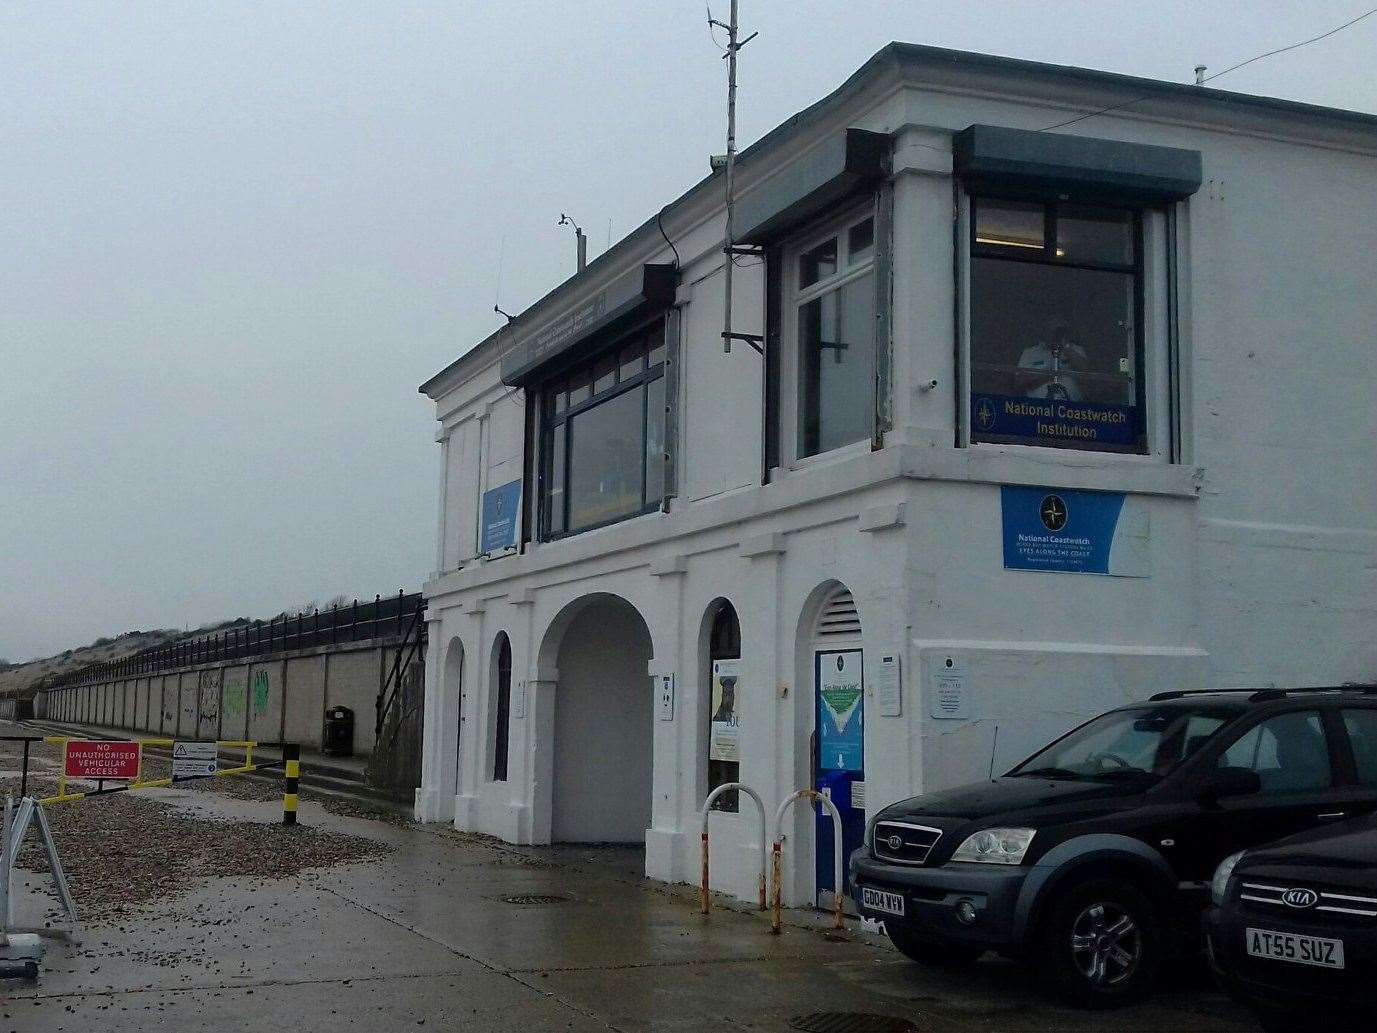 NCI Herne Bay Watch Station in Eastern Esplanade closed permanently earlier this year. Picture: NCI Herne Bay